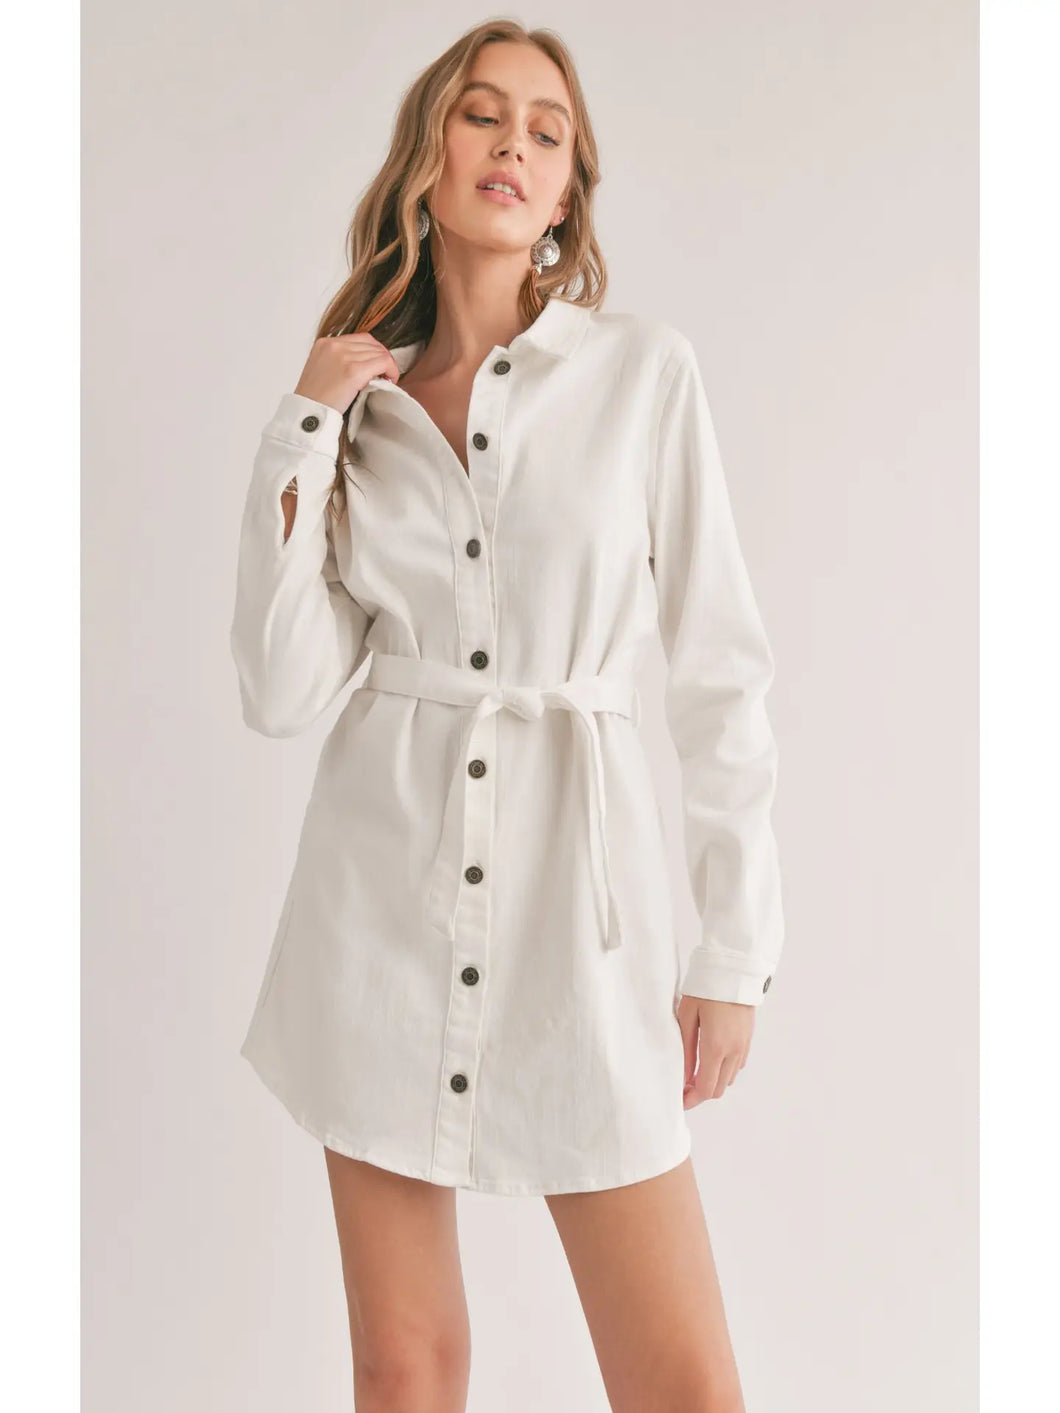 White Denim Long Sleeve Button Front Dress with belt